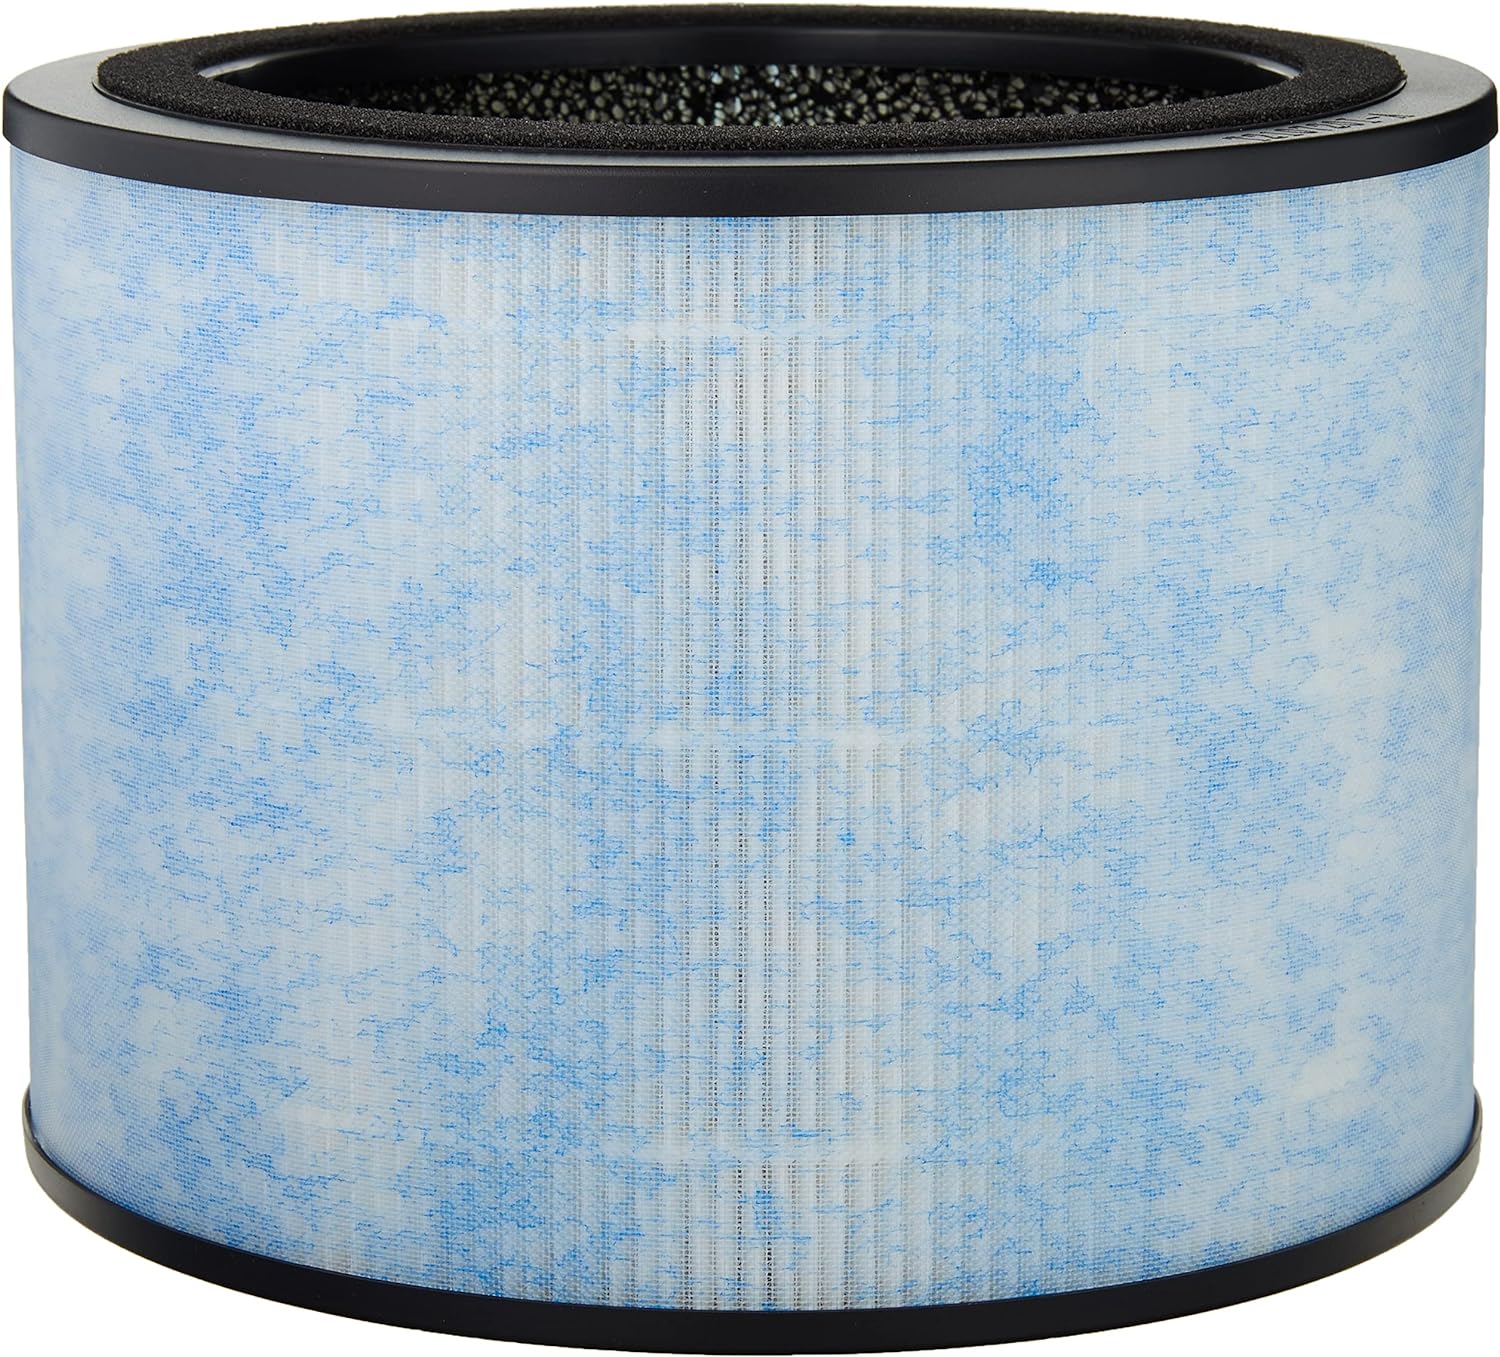 Instant Air Purifier – Filter For AP200 / Removes 99.9% of Dust